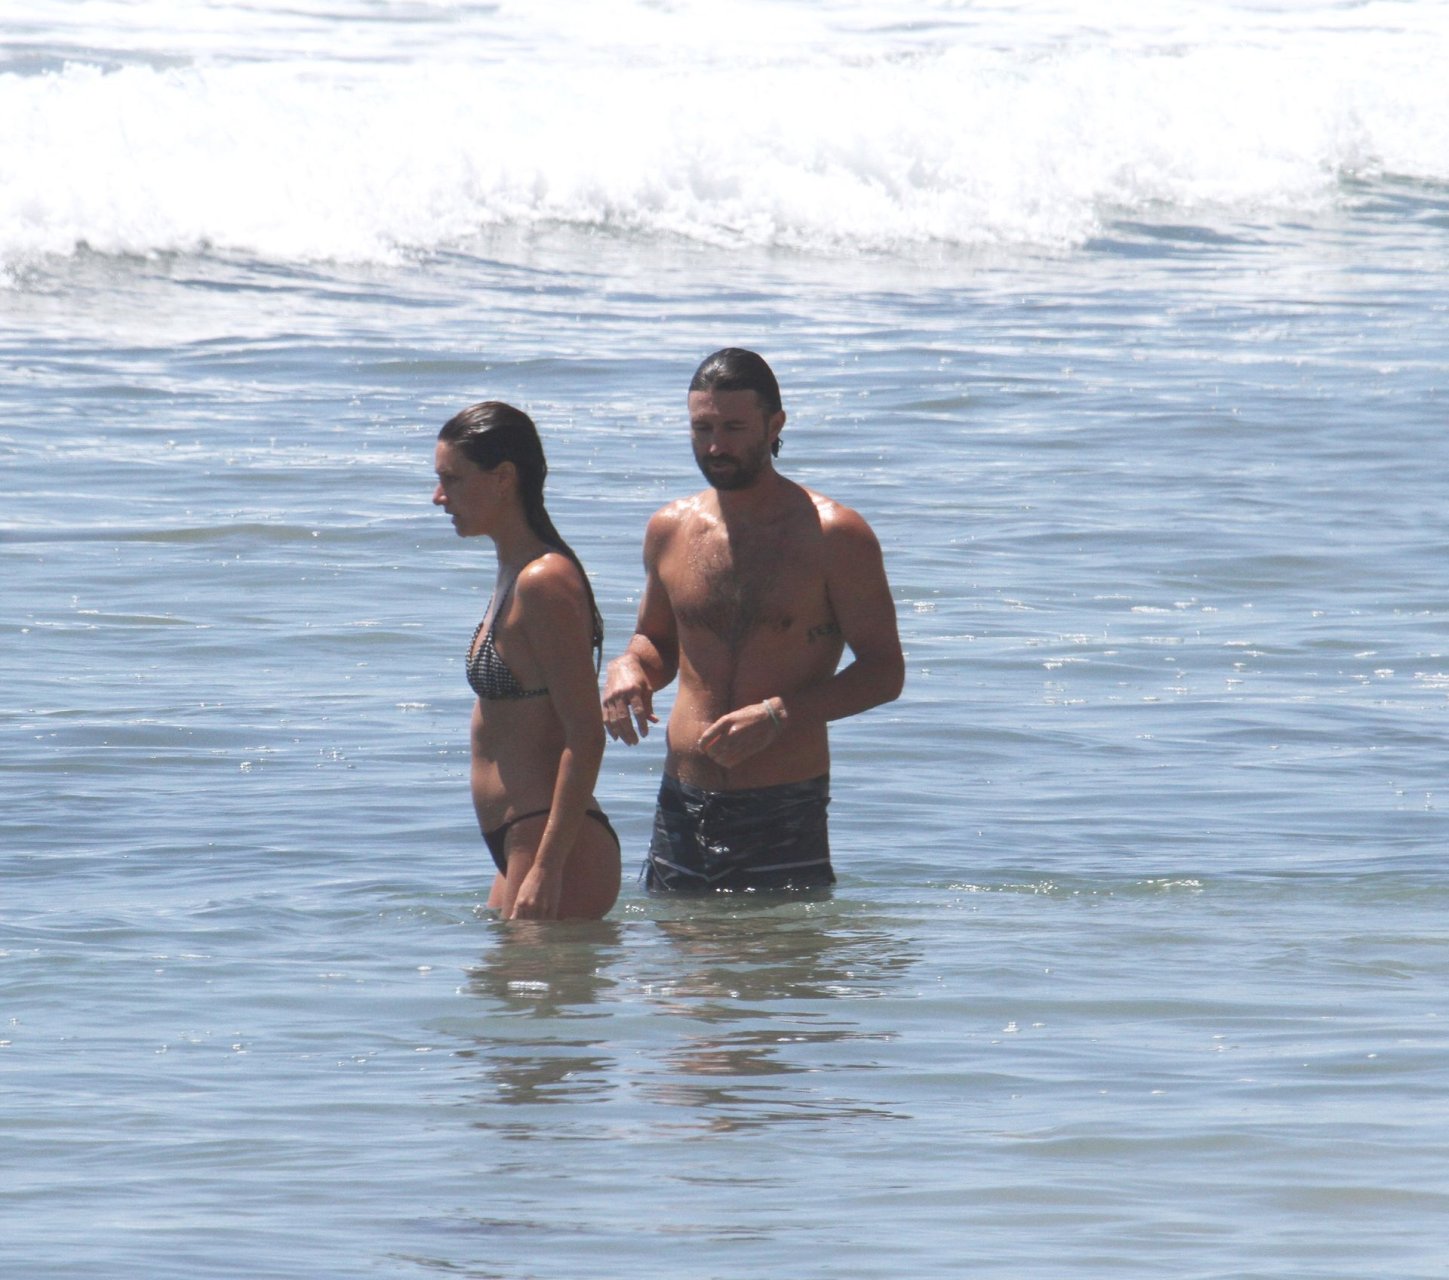 Brandon Jenner shirtless swimming in the ocean with a pregnant girlfriend, Cayley...